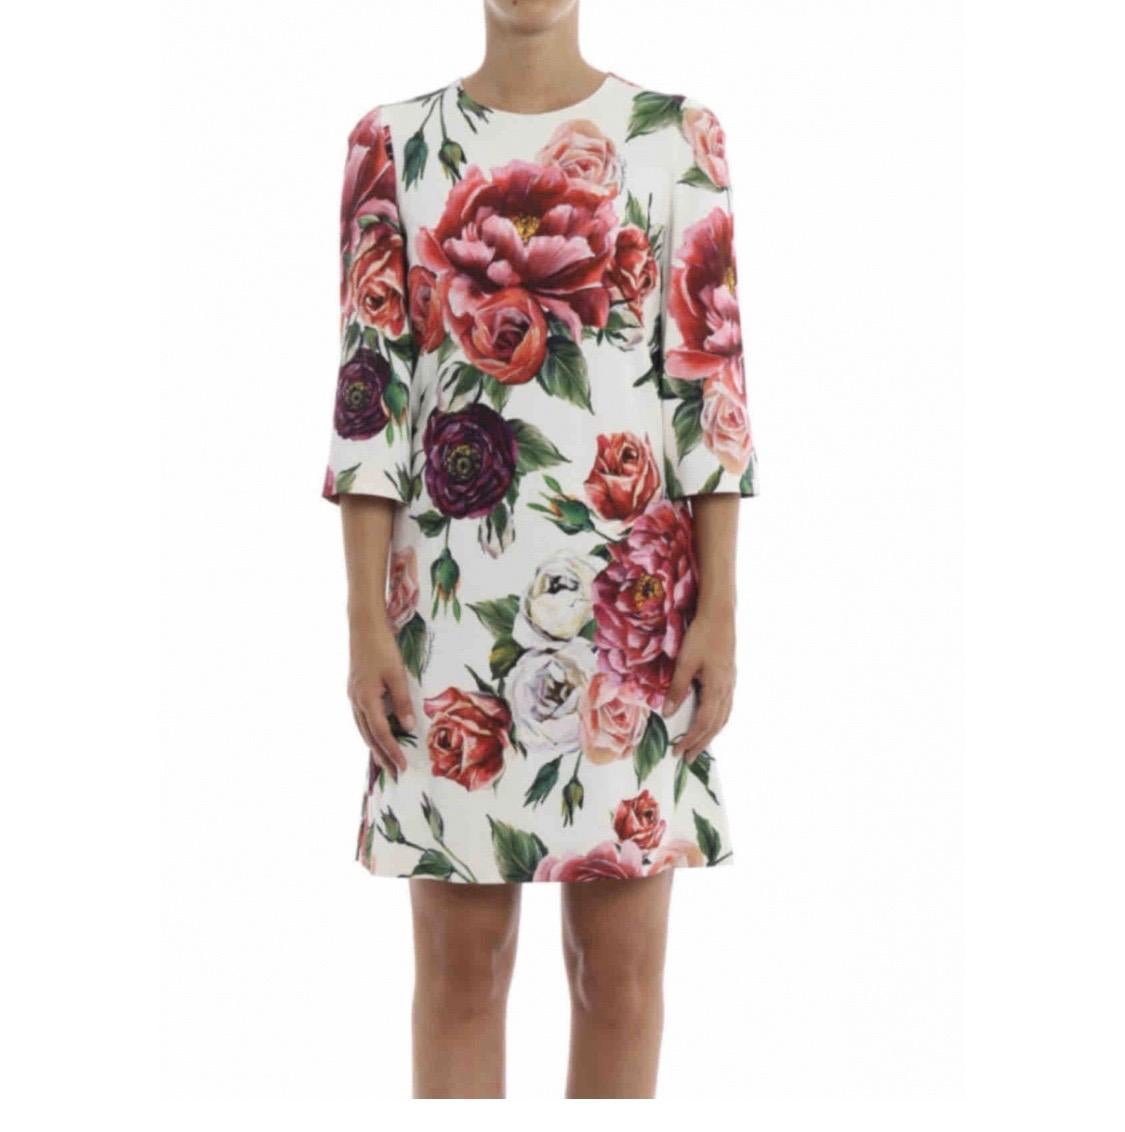  Dolce & Gabbana Peony print stretch
cady A-line crewneck dress detailed
with three quarter sleeves, rear
concealed zip and hook fastening,
stretch silk lining.

Size 38IT UK6, XS.

Composition and details
97% Viscose, 3% Elastane
Lining: 96% Silk,